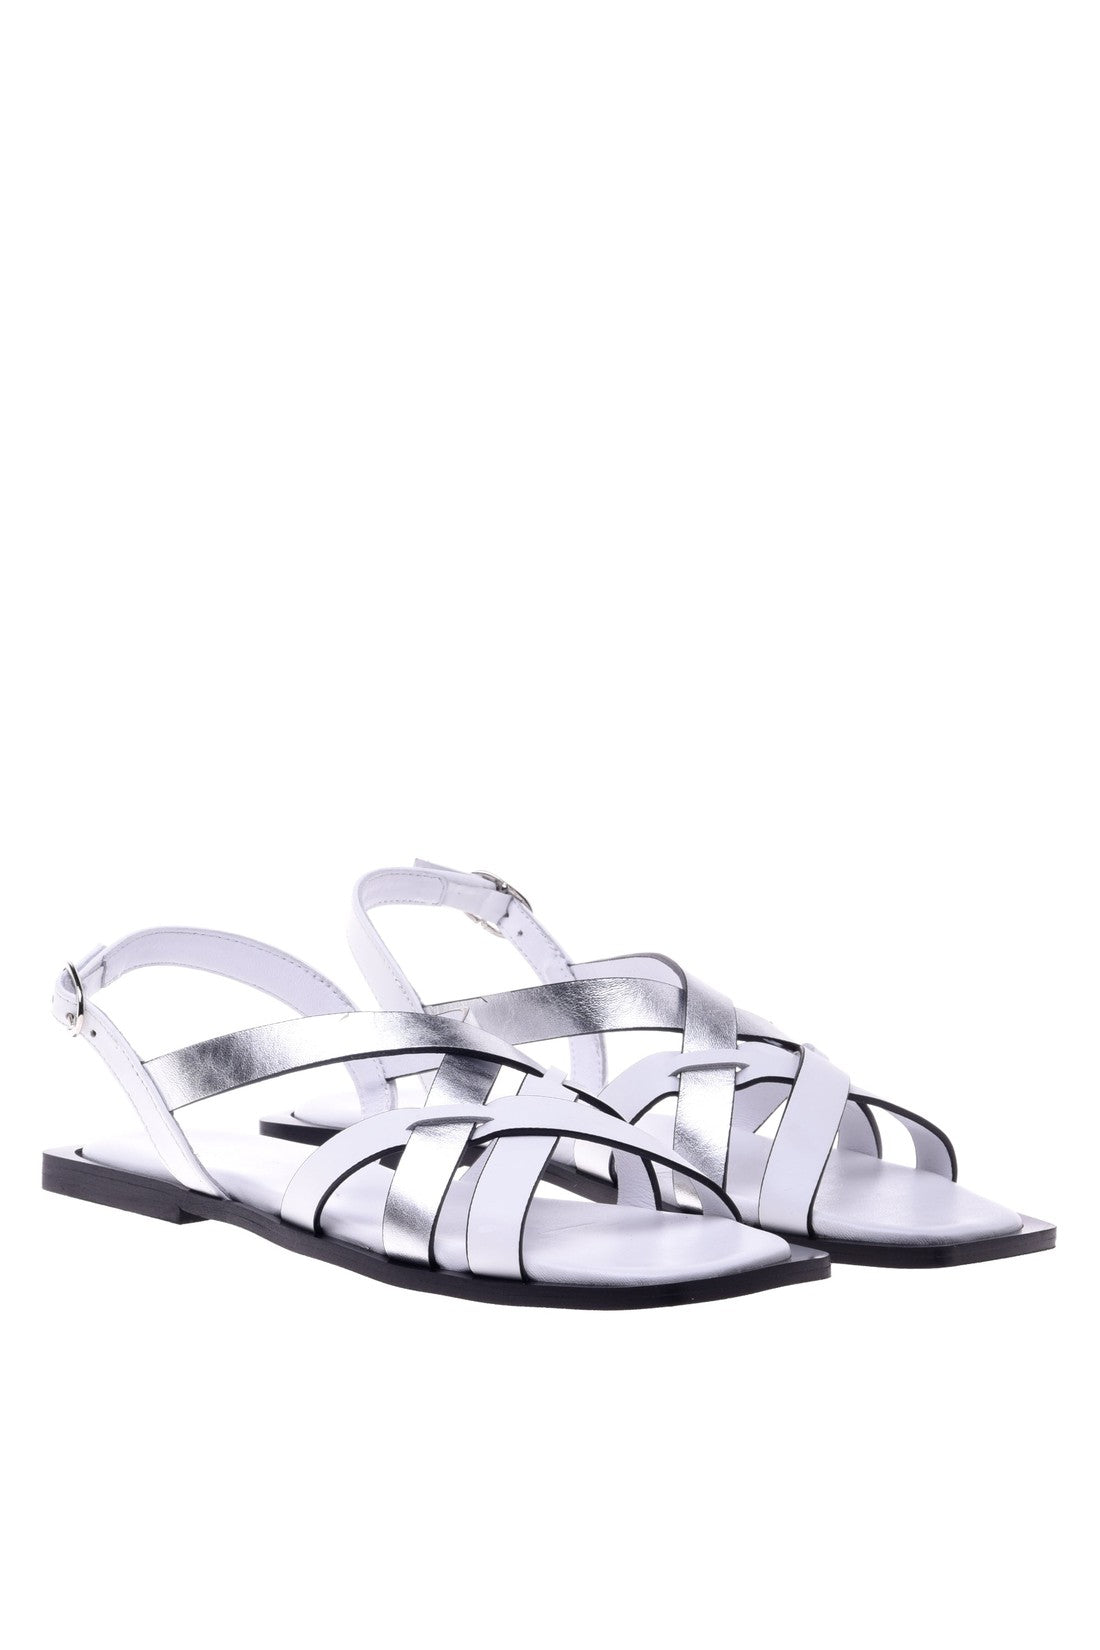 BALDININI-OUTLET-SALE-Sandal-in-white-and-silver-calfskin-Sandalen-ARCHIVE-COLLECTION-3.jpg